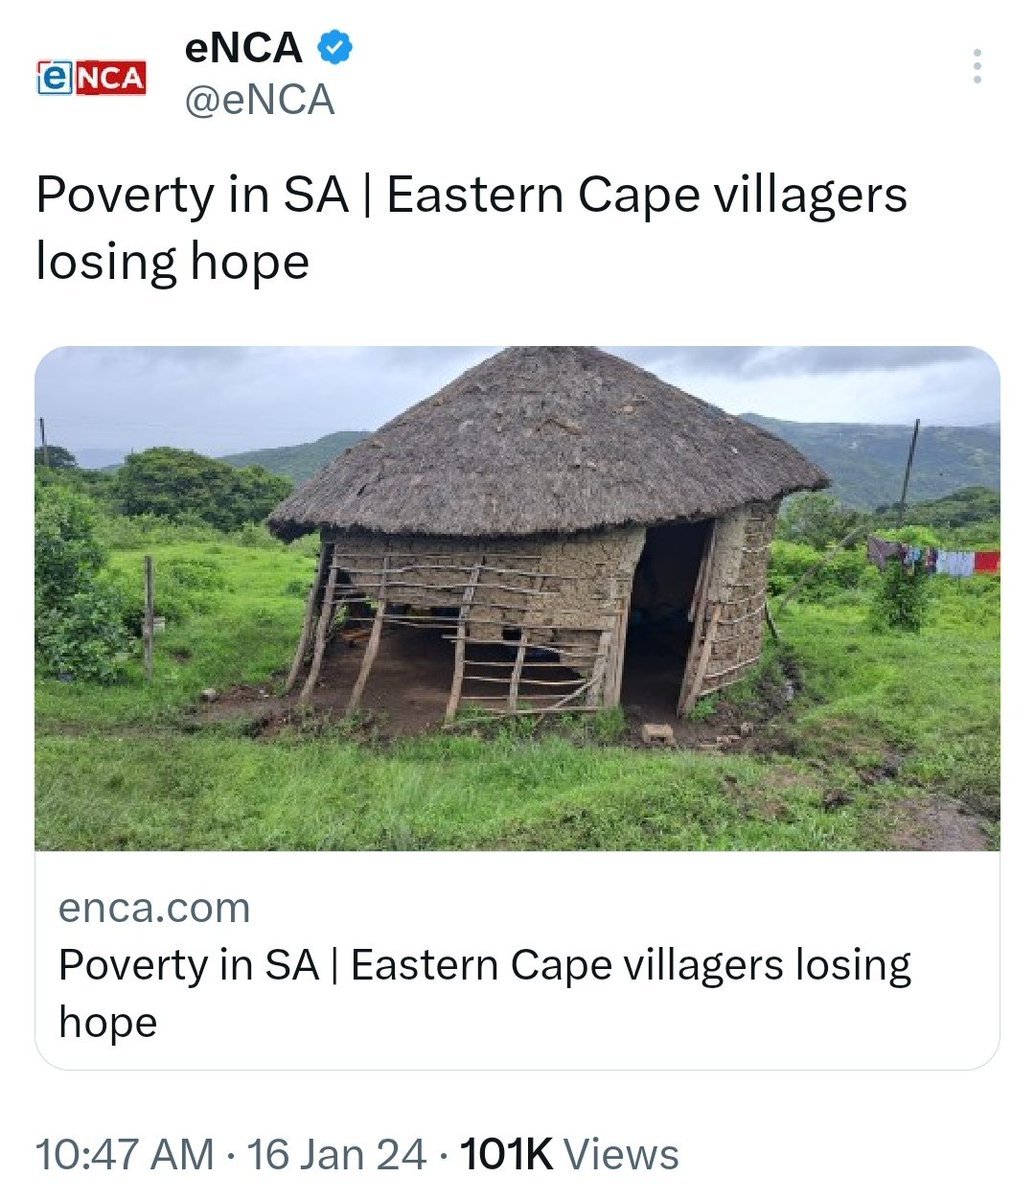 I have taken a Screenshot of this tweet before Hopewell Chin'ono, @daddyhope & his Anti-Zimbabwe Noise Makers Brigade steal it & claim it to be in Zimbabwe 🤣🤣🤣